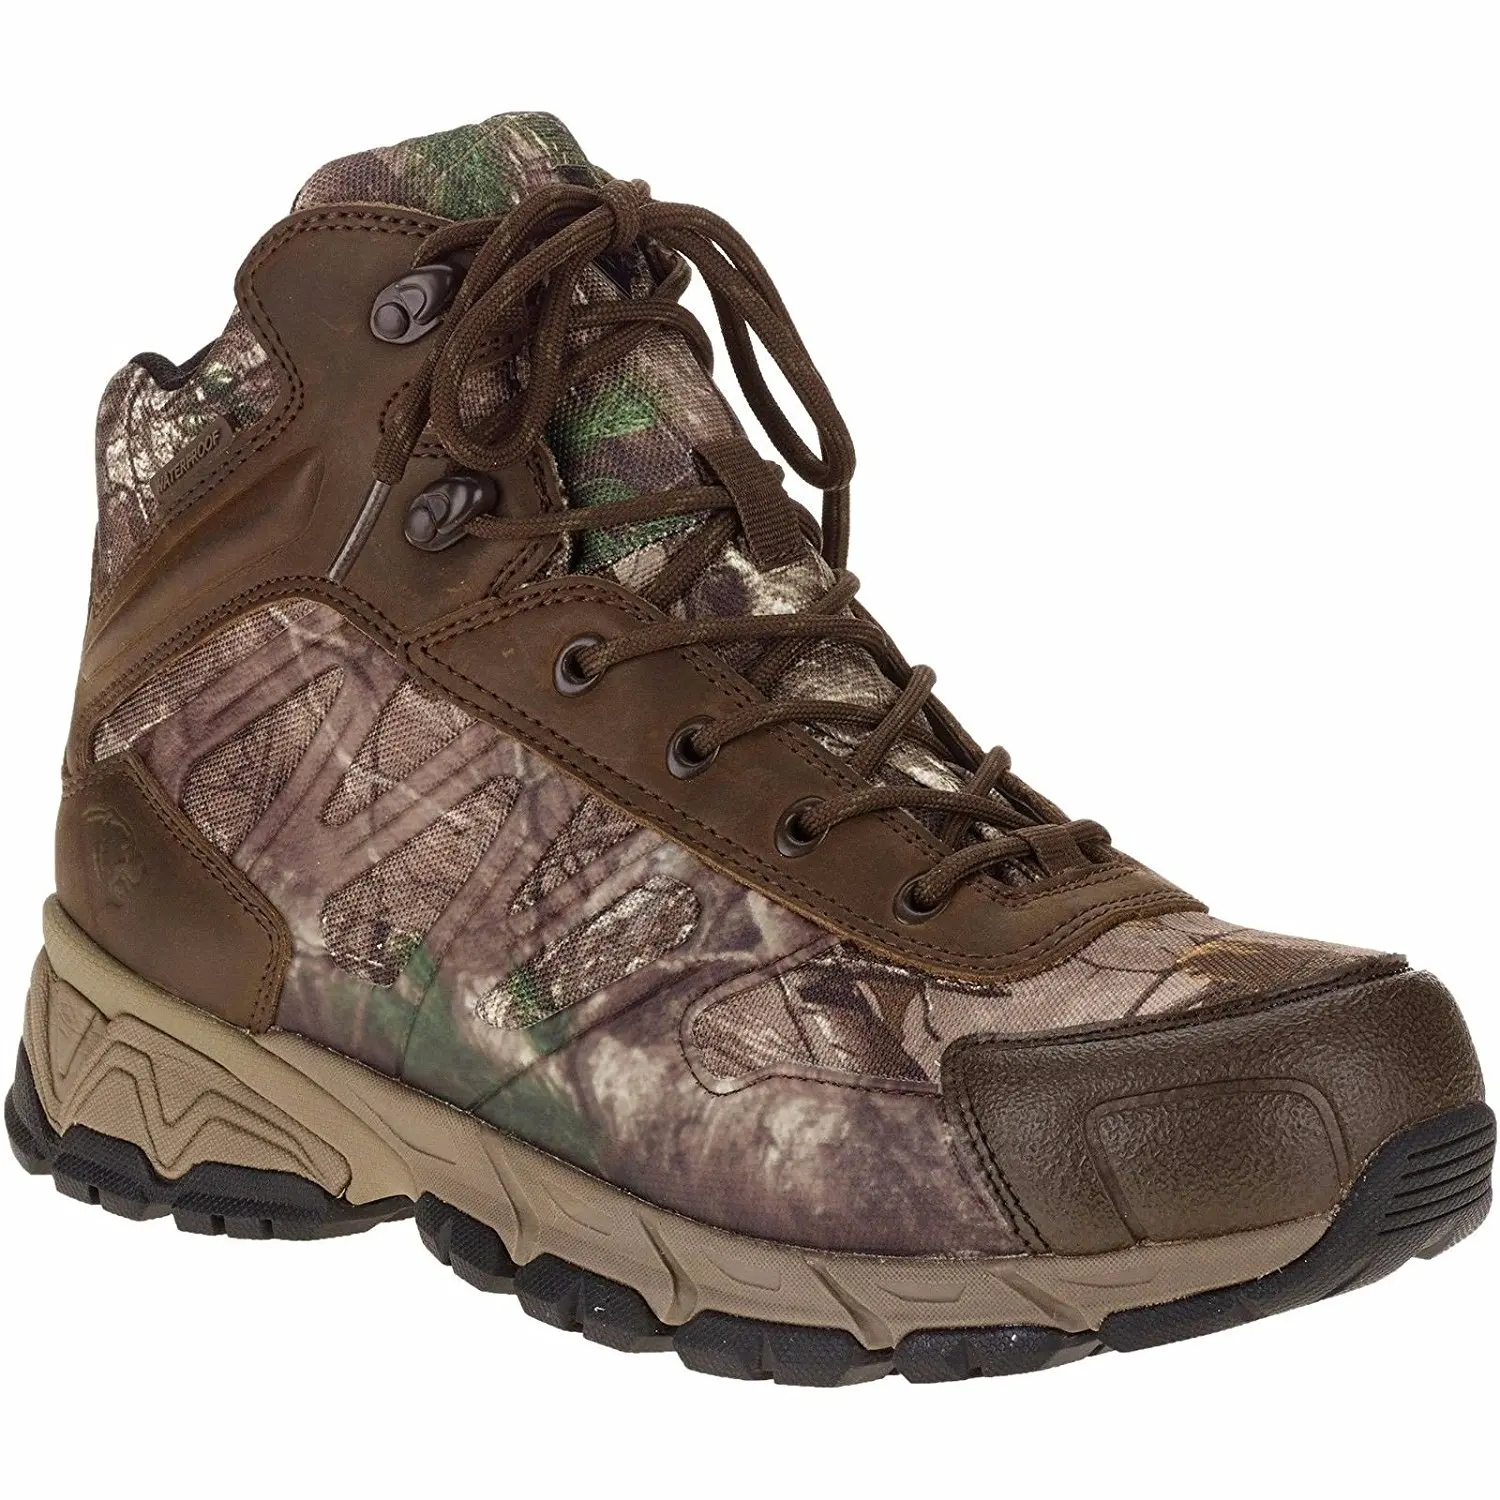 herman survivors thinsulate boots